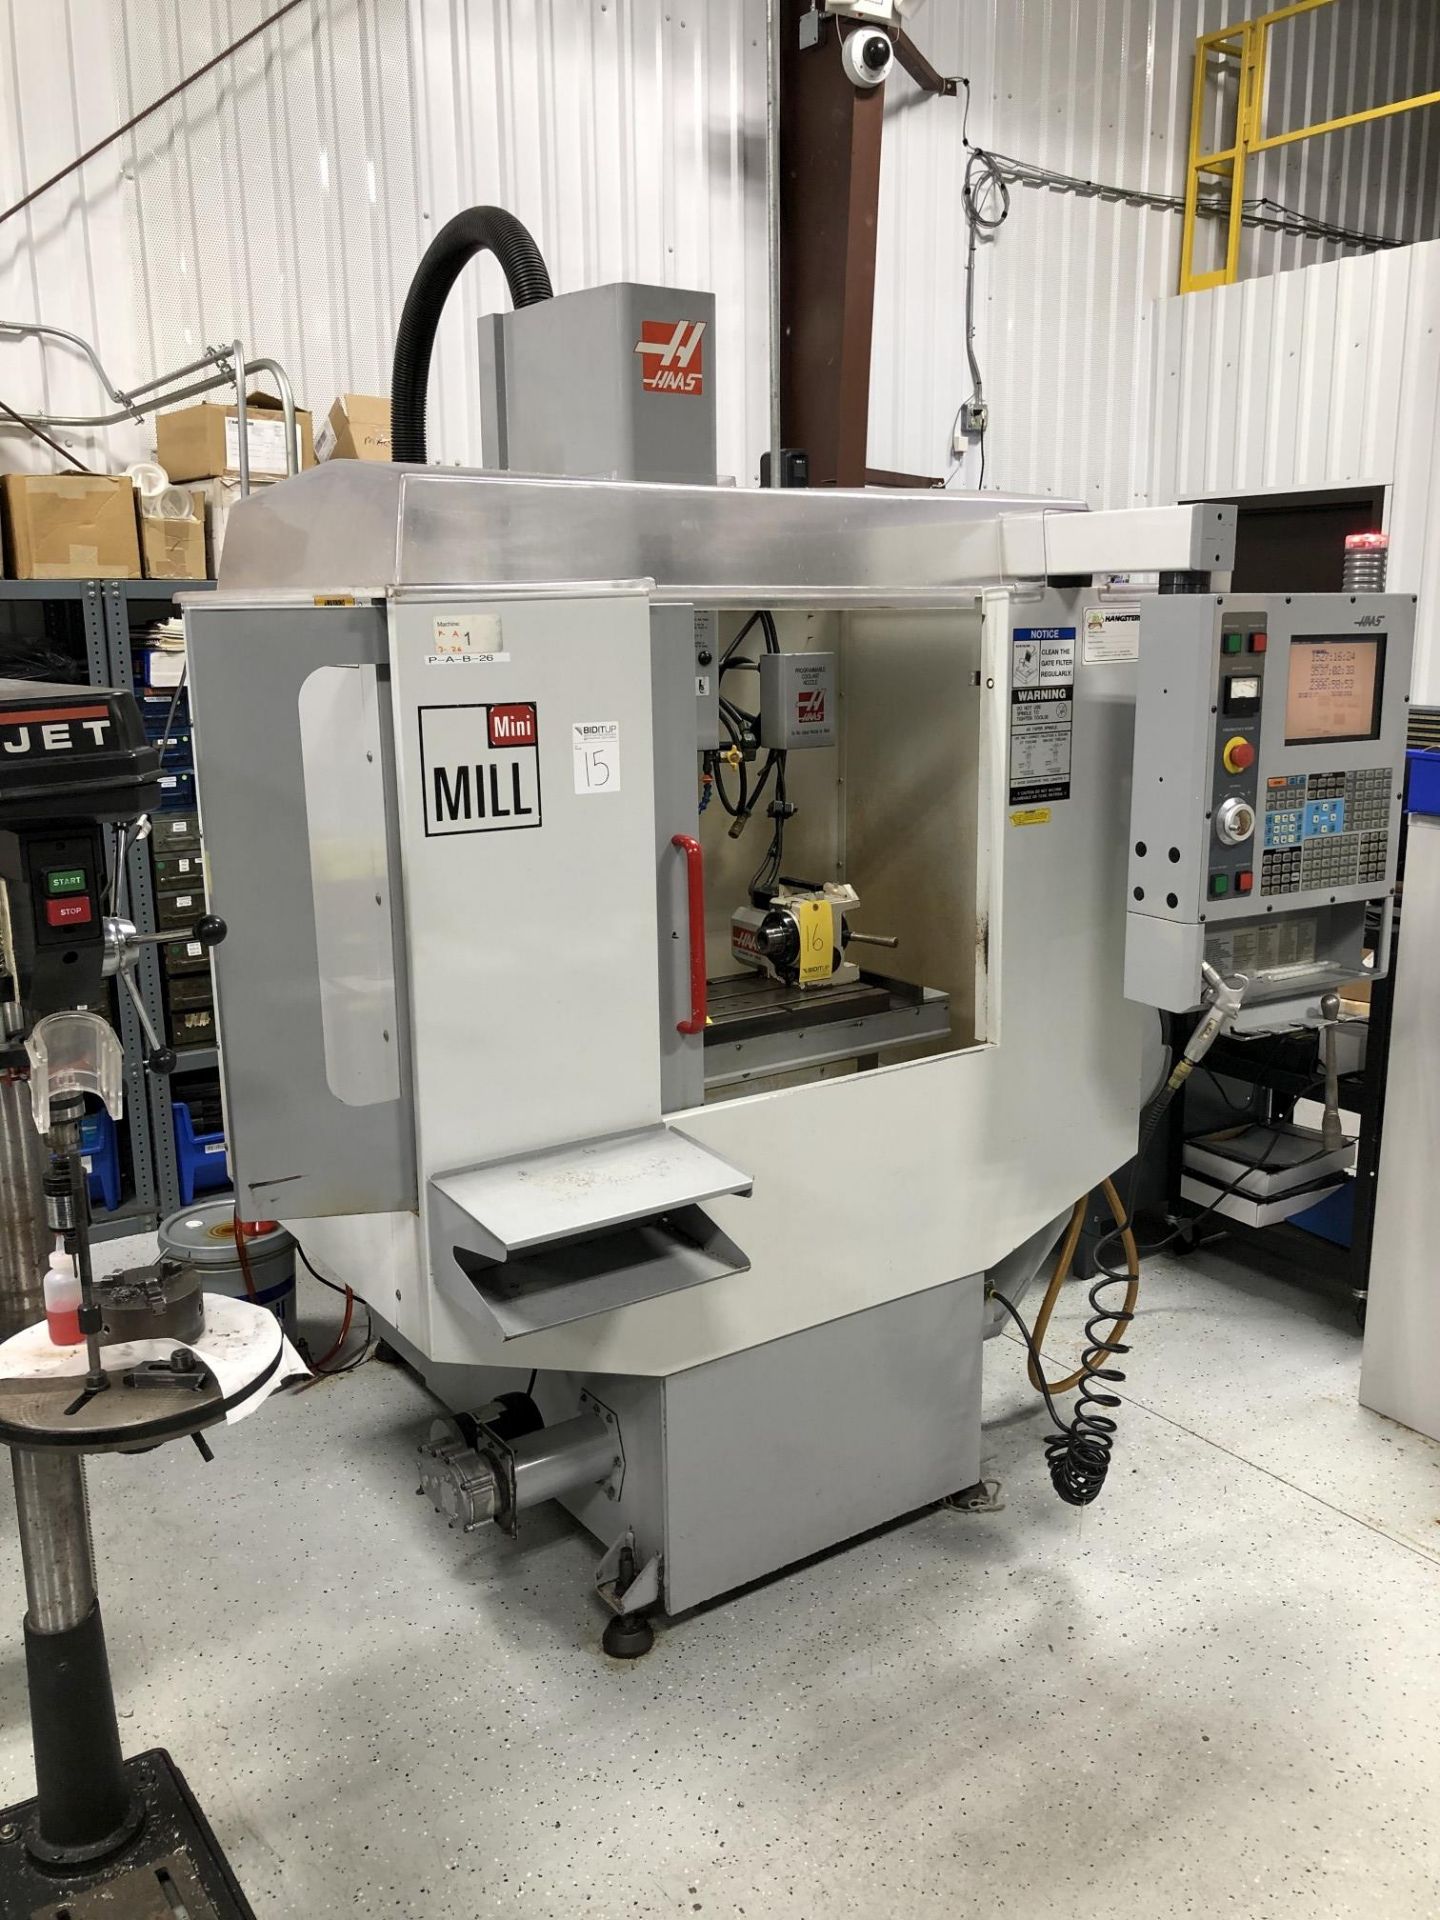 2004 Haas Mini Mill CNC Vertical Machining Center - Image 3 of 13